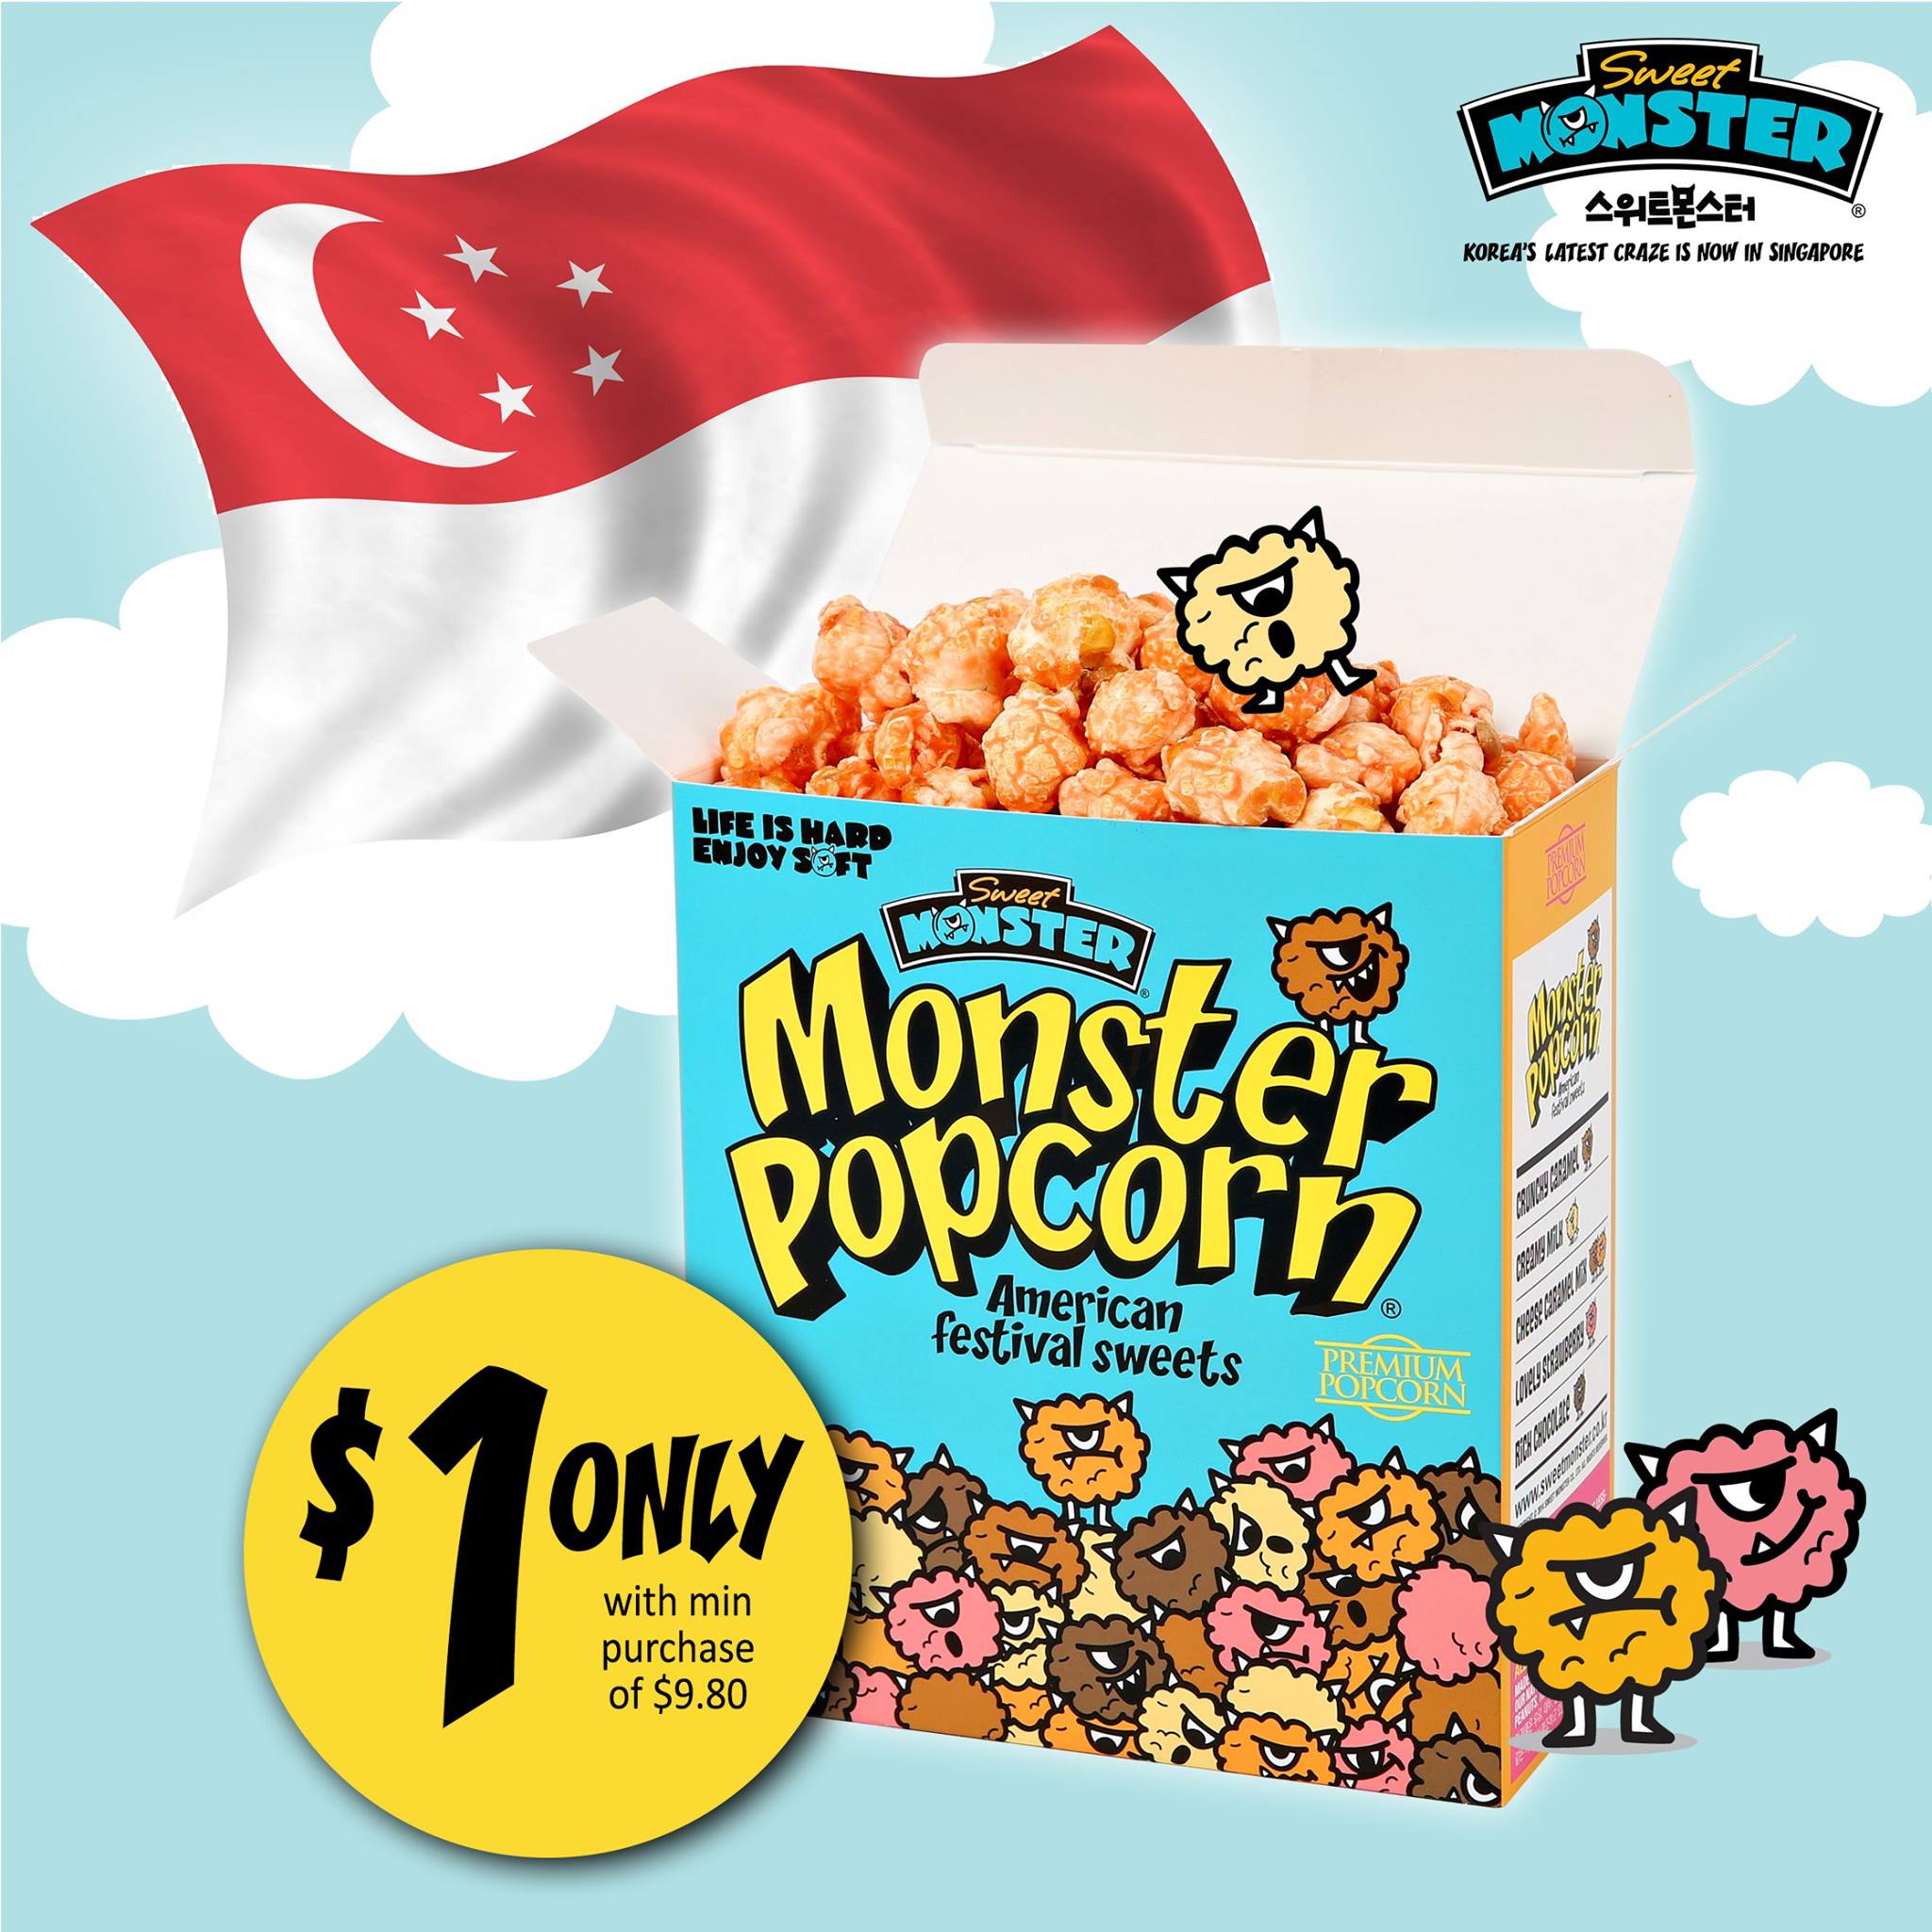 Sweet Monster Singapore National Day $1 Popcorn Promotion 5 to 10 Aug 2016